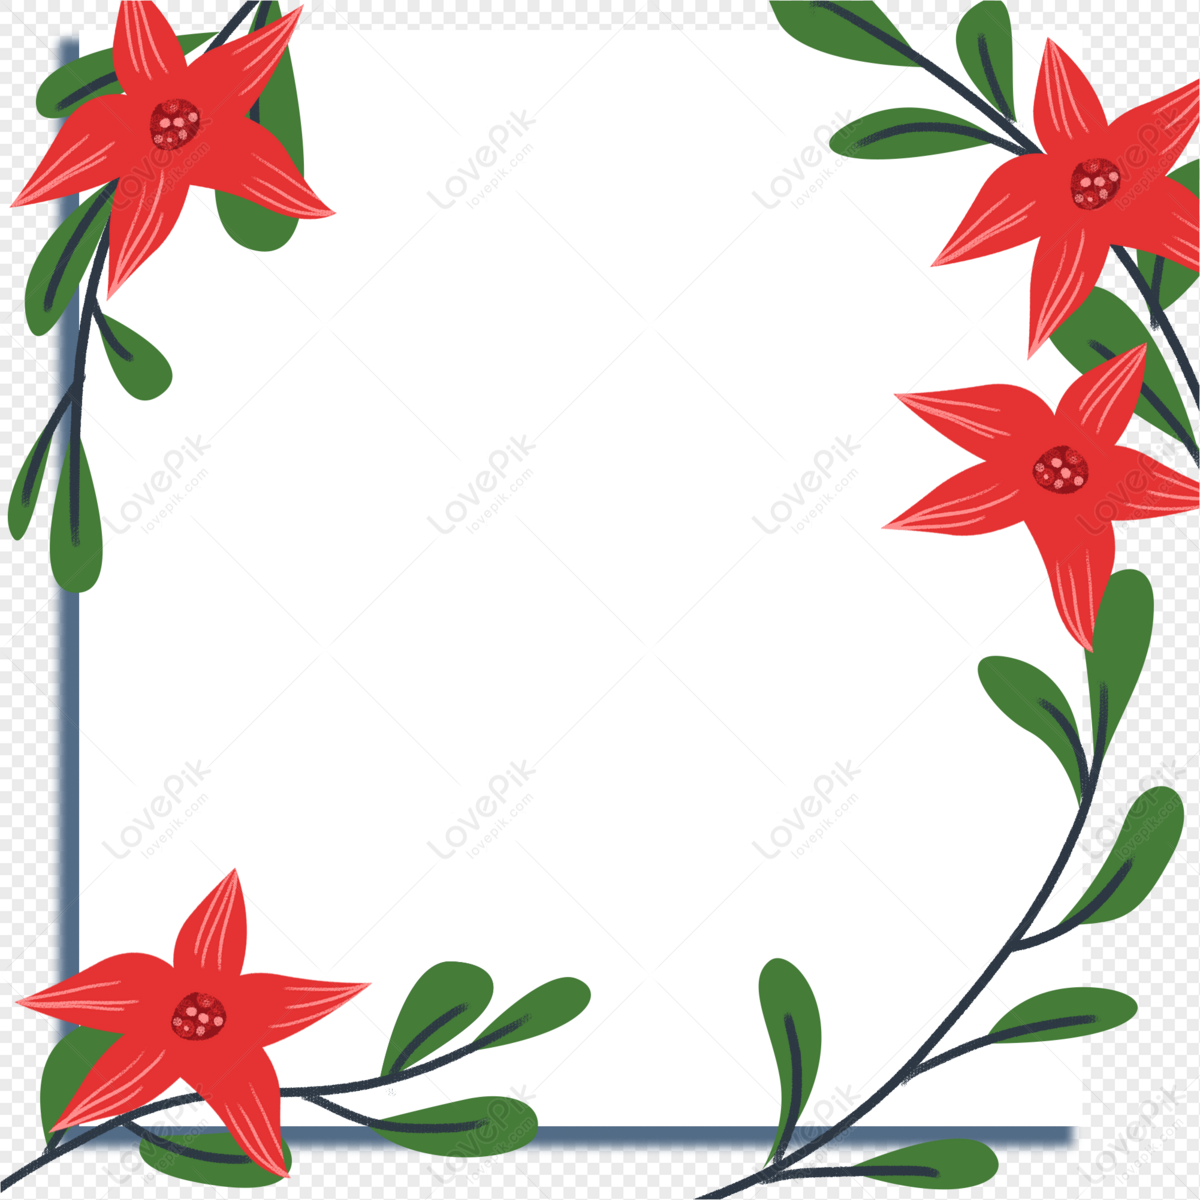 Red Flower Decorative Border Photo Frame PNG Transparent And ...